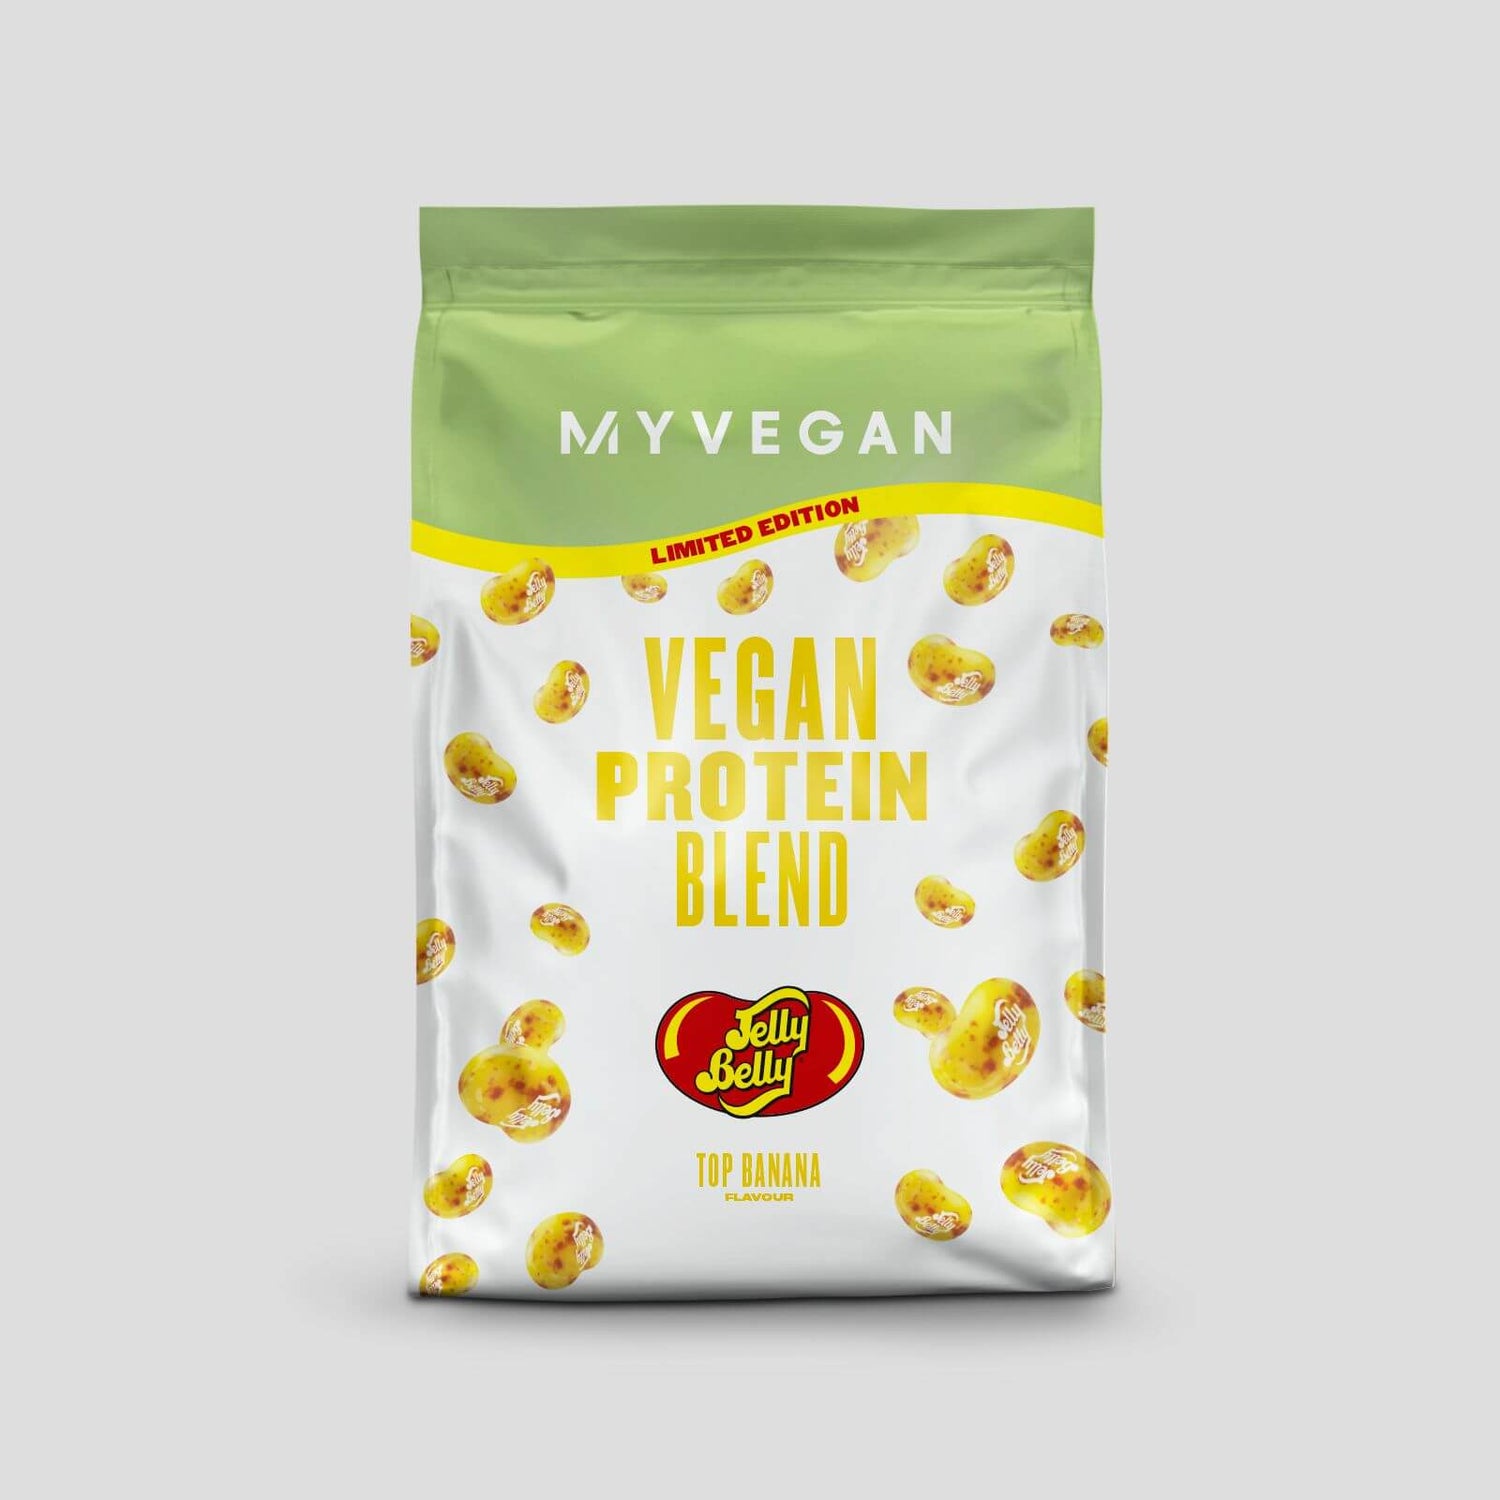 Vegan Protein Blend - Limited Edition Jelly Belly - Top Banana